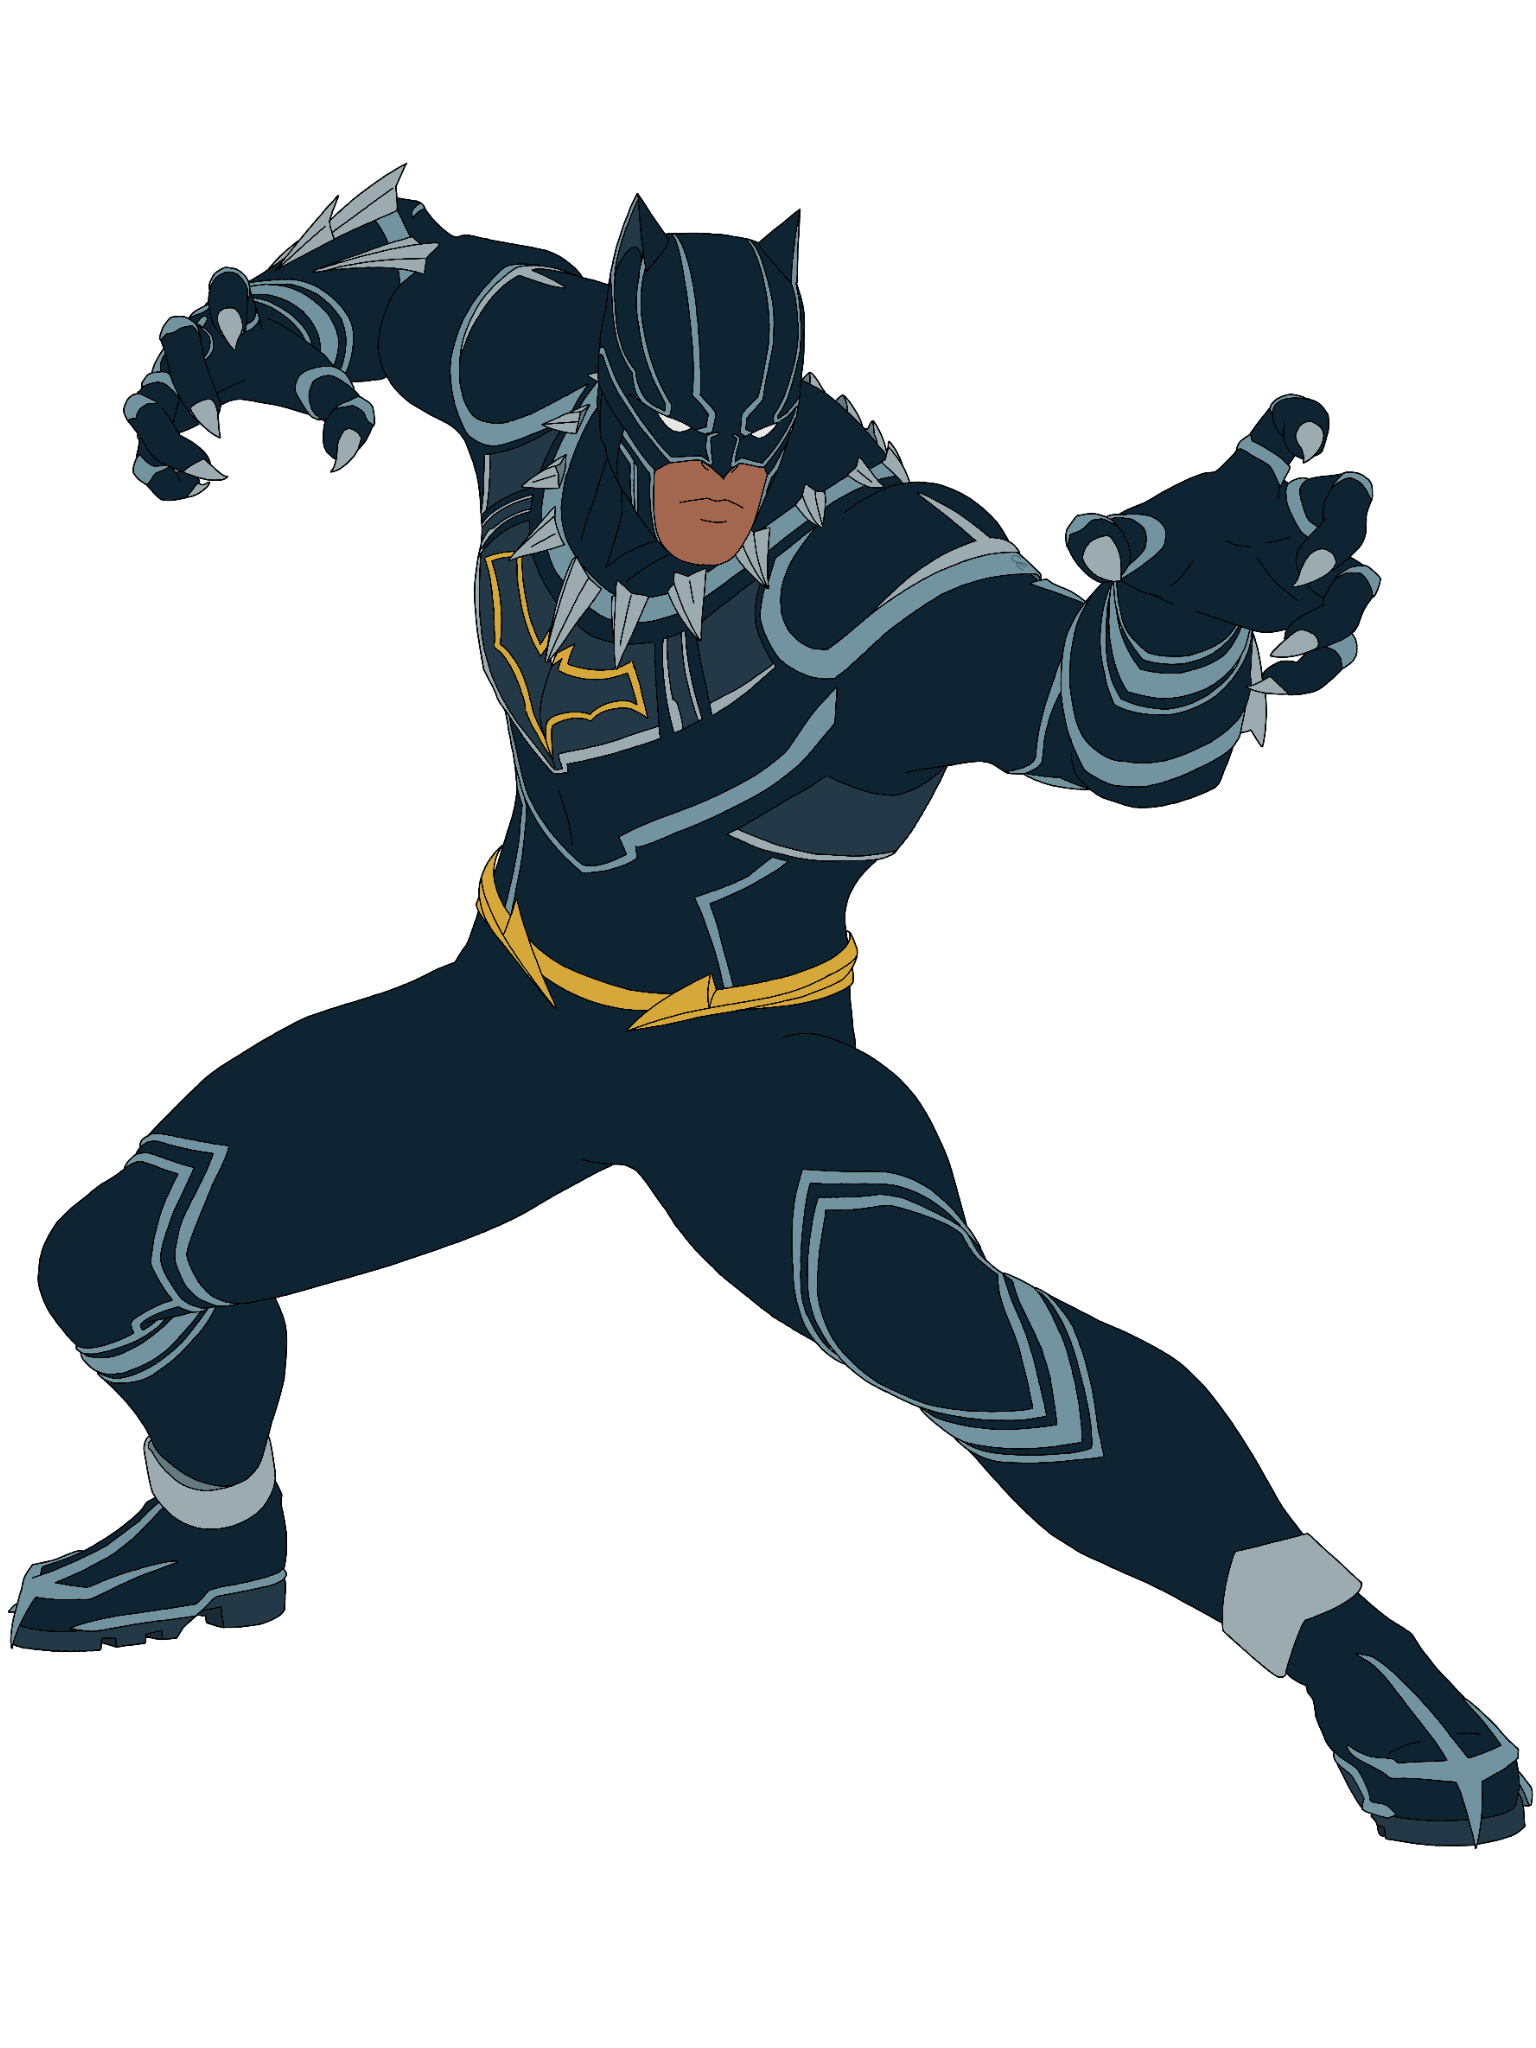 Black Panther x Batman (Requested) by LordDerpington171 on DeviantArt